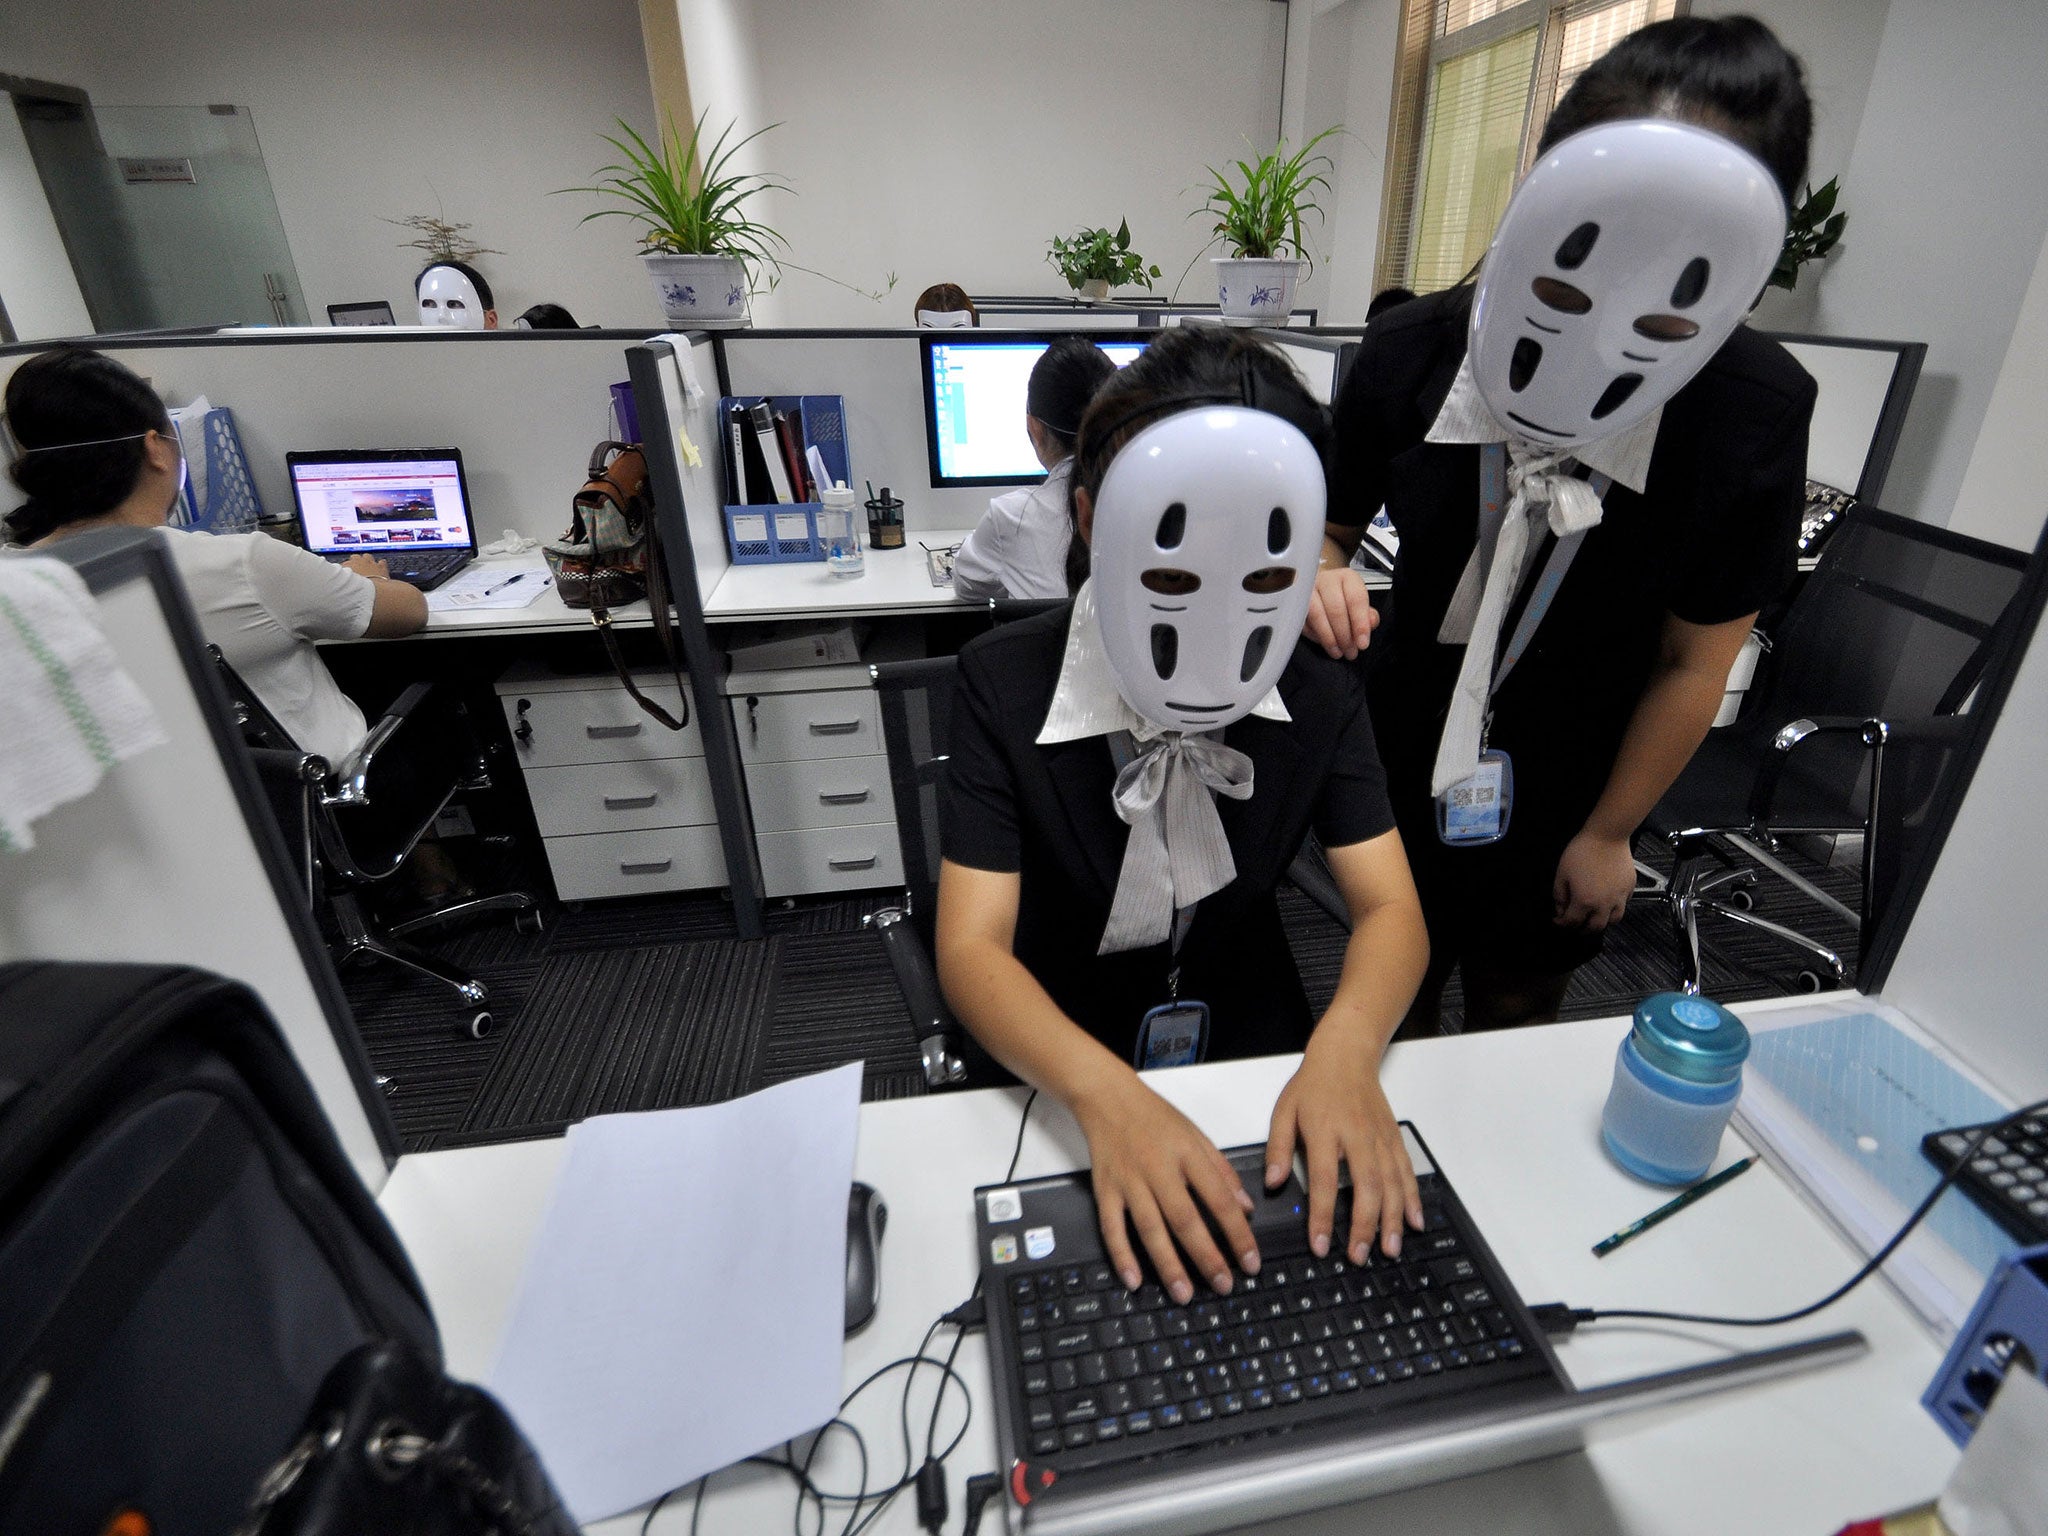 Staff wear No-Face masks during working hours at a service company on July 14, 2015 in Handan, Hebei Province of China. As a service company, its staffs must smile to customers everyday. On 'No-Face Day', the staffs wore No-Face masks to reduce pressure and relax themselves. No-Face is a silent masked creature who has no facial expressions in Japanese animated fantasy film 'Spirited Away'.